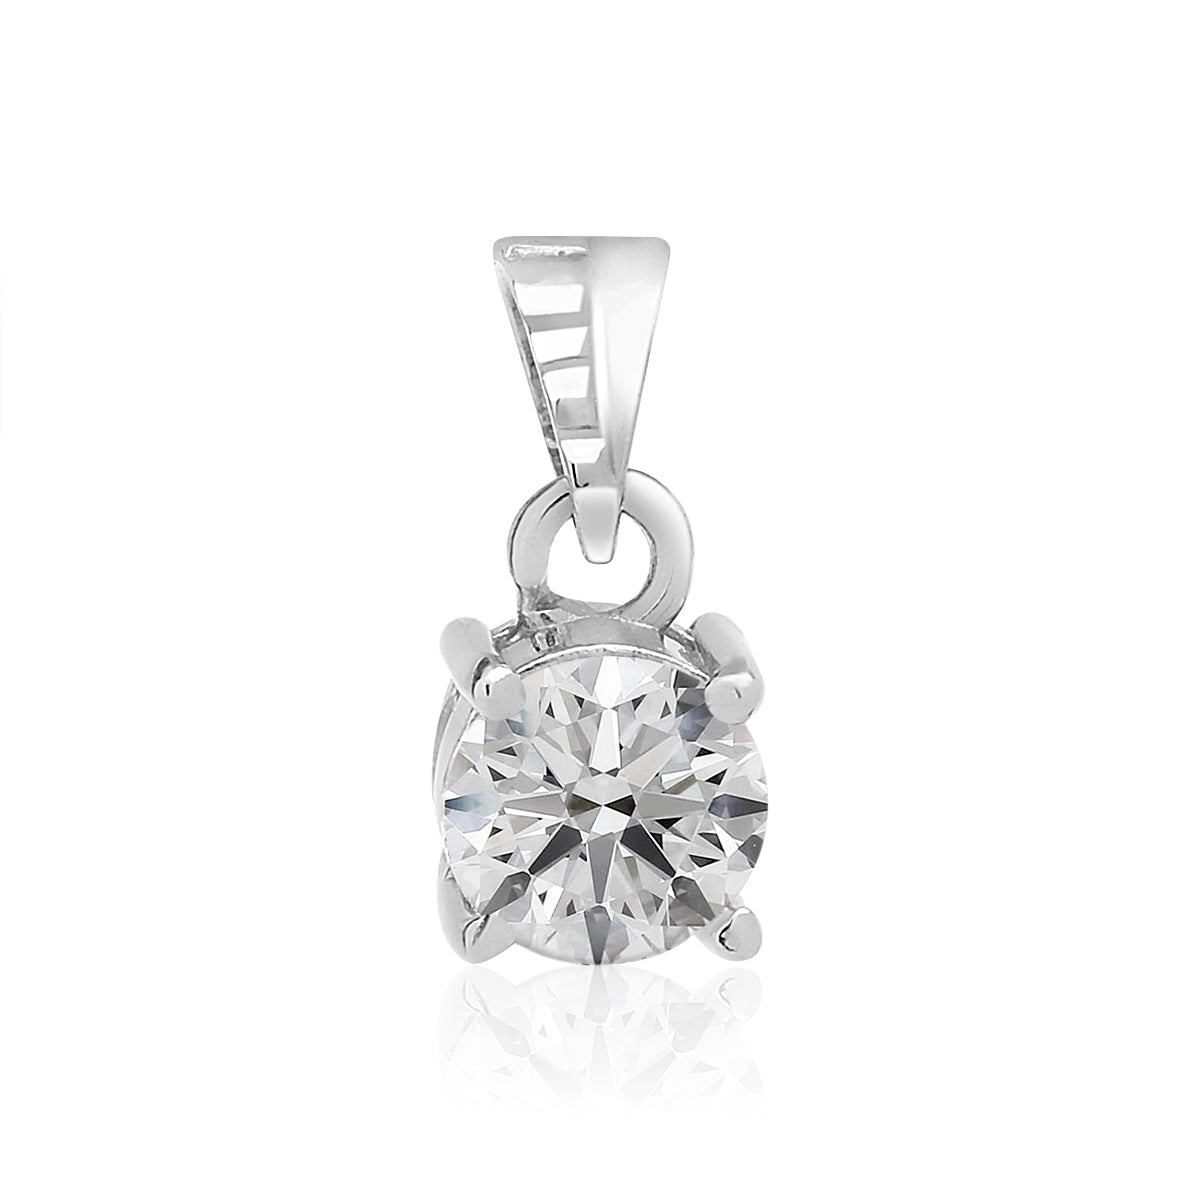 Sterling silver Box chain With Round Solitaire pendant